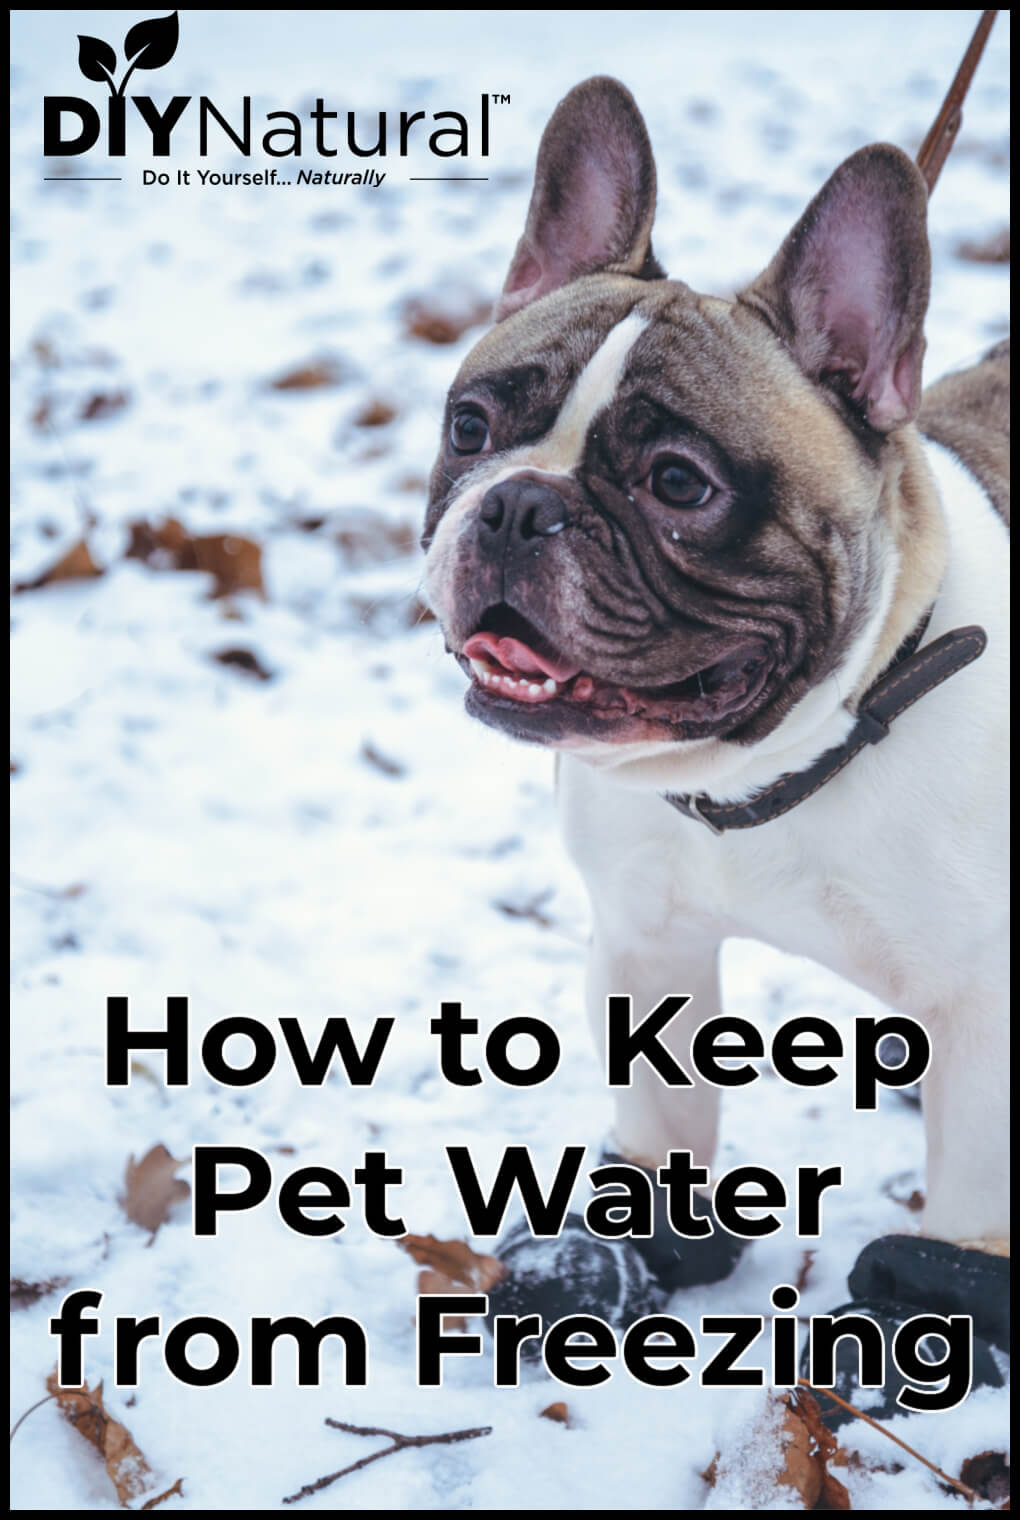 https://diynatural.com/wp-content/uploads/Keep-Dogs-Water-From-Freezing-Pin.jpg